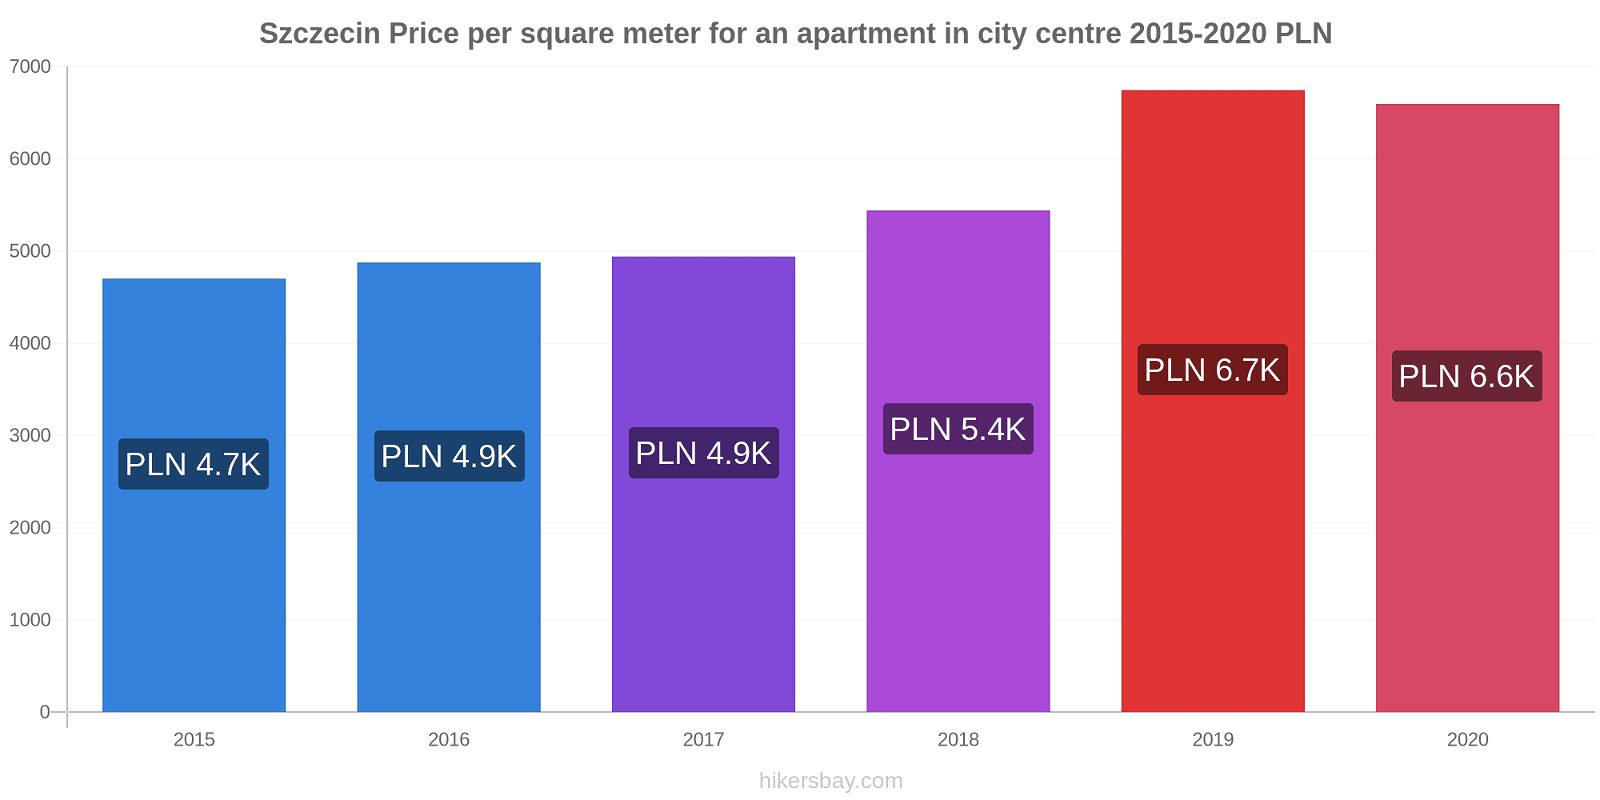 Szczecin price changes Price per square meter for an apartment in city centre hikersbay.com